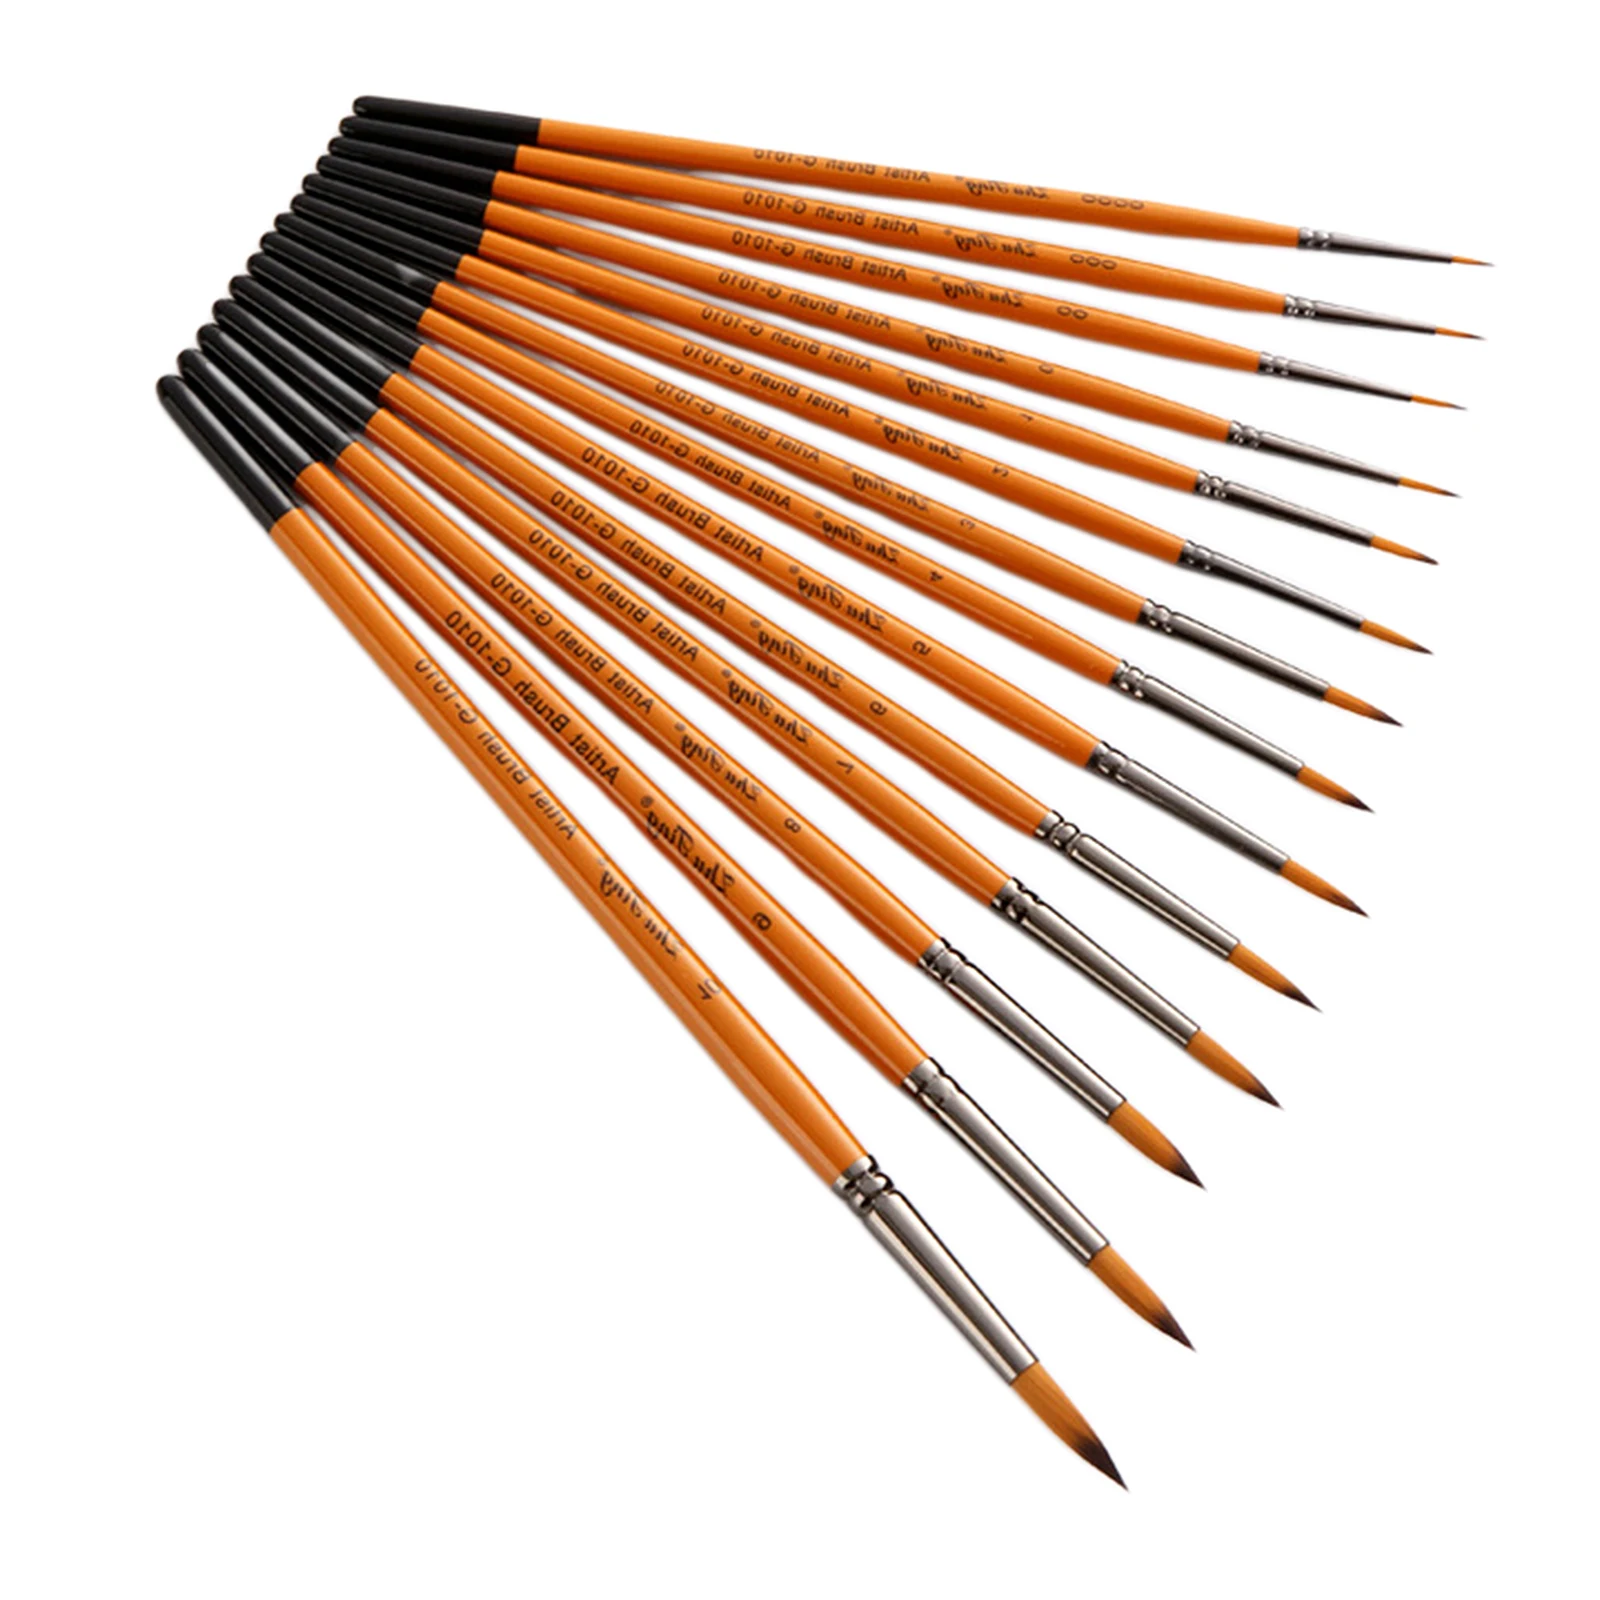 14Pcs/Set Wooden Handle Nylon Hair Artist Paint Brushes for Acrylic Watercolor Oil Painting Supplies Art Craft Kit